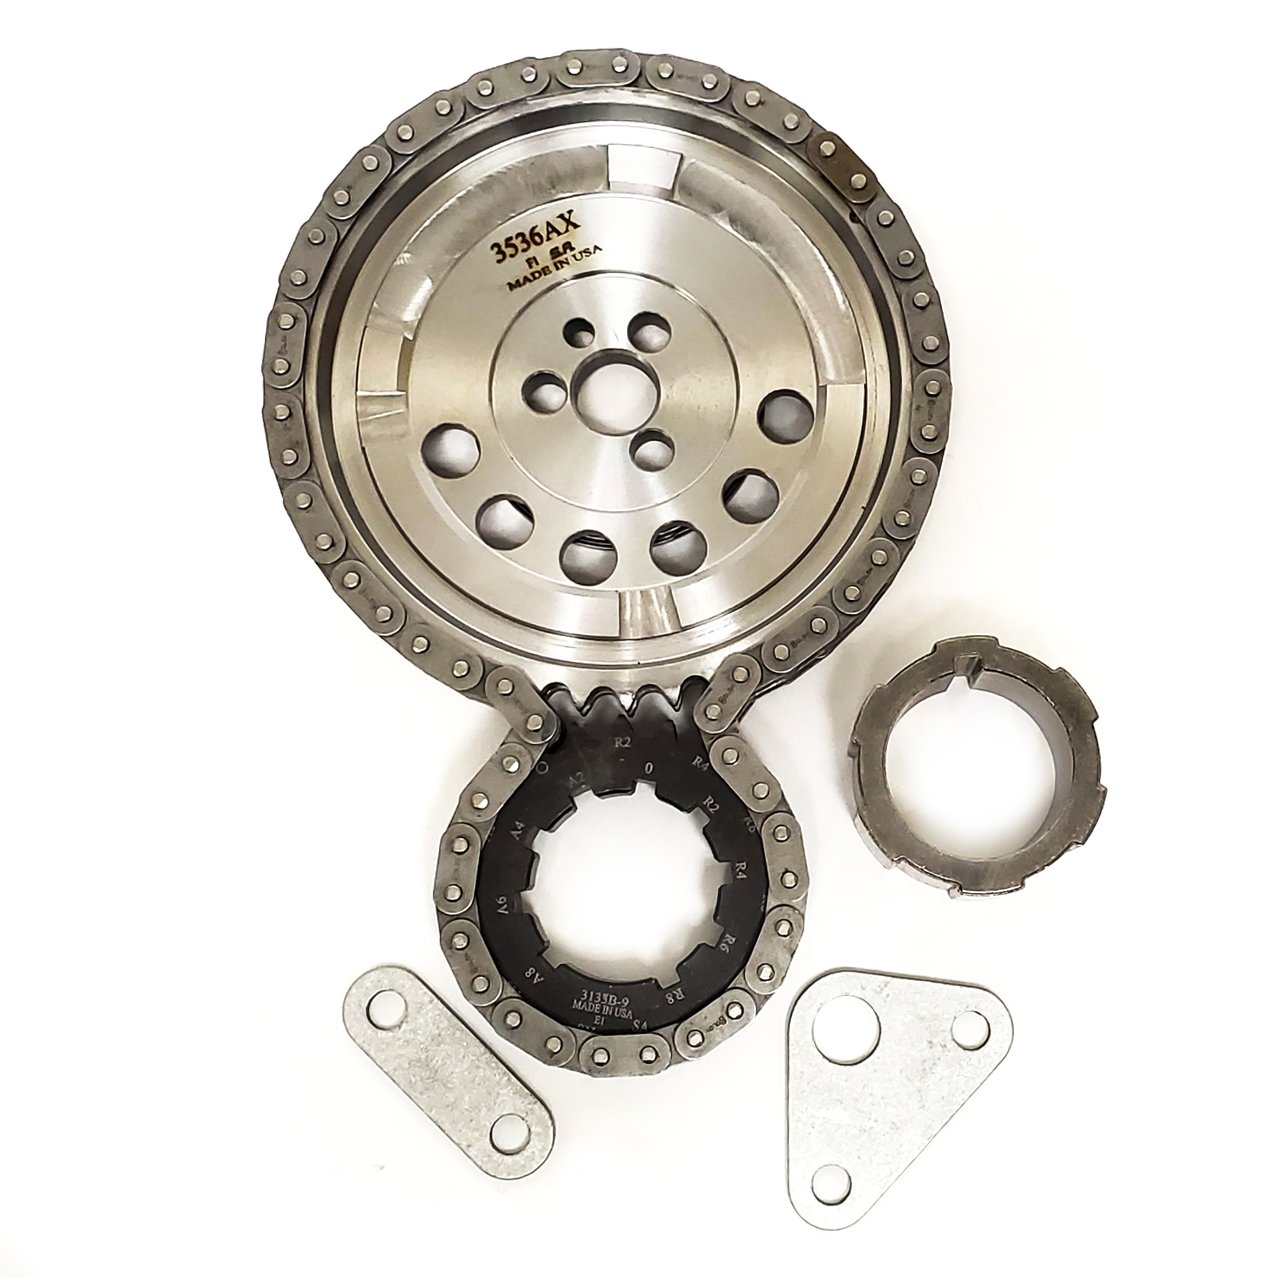 Double-Roller Timing Chain and Gear Set for 2006-2007 GM 6.0/6.2L